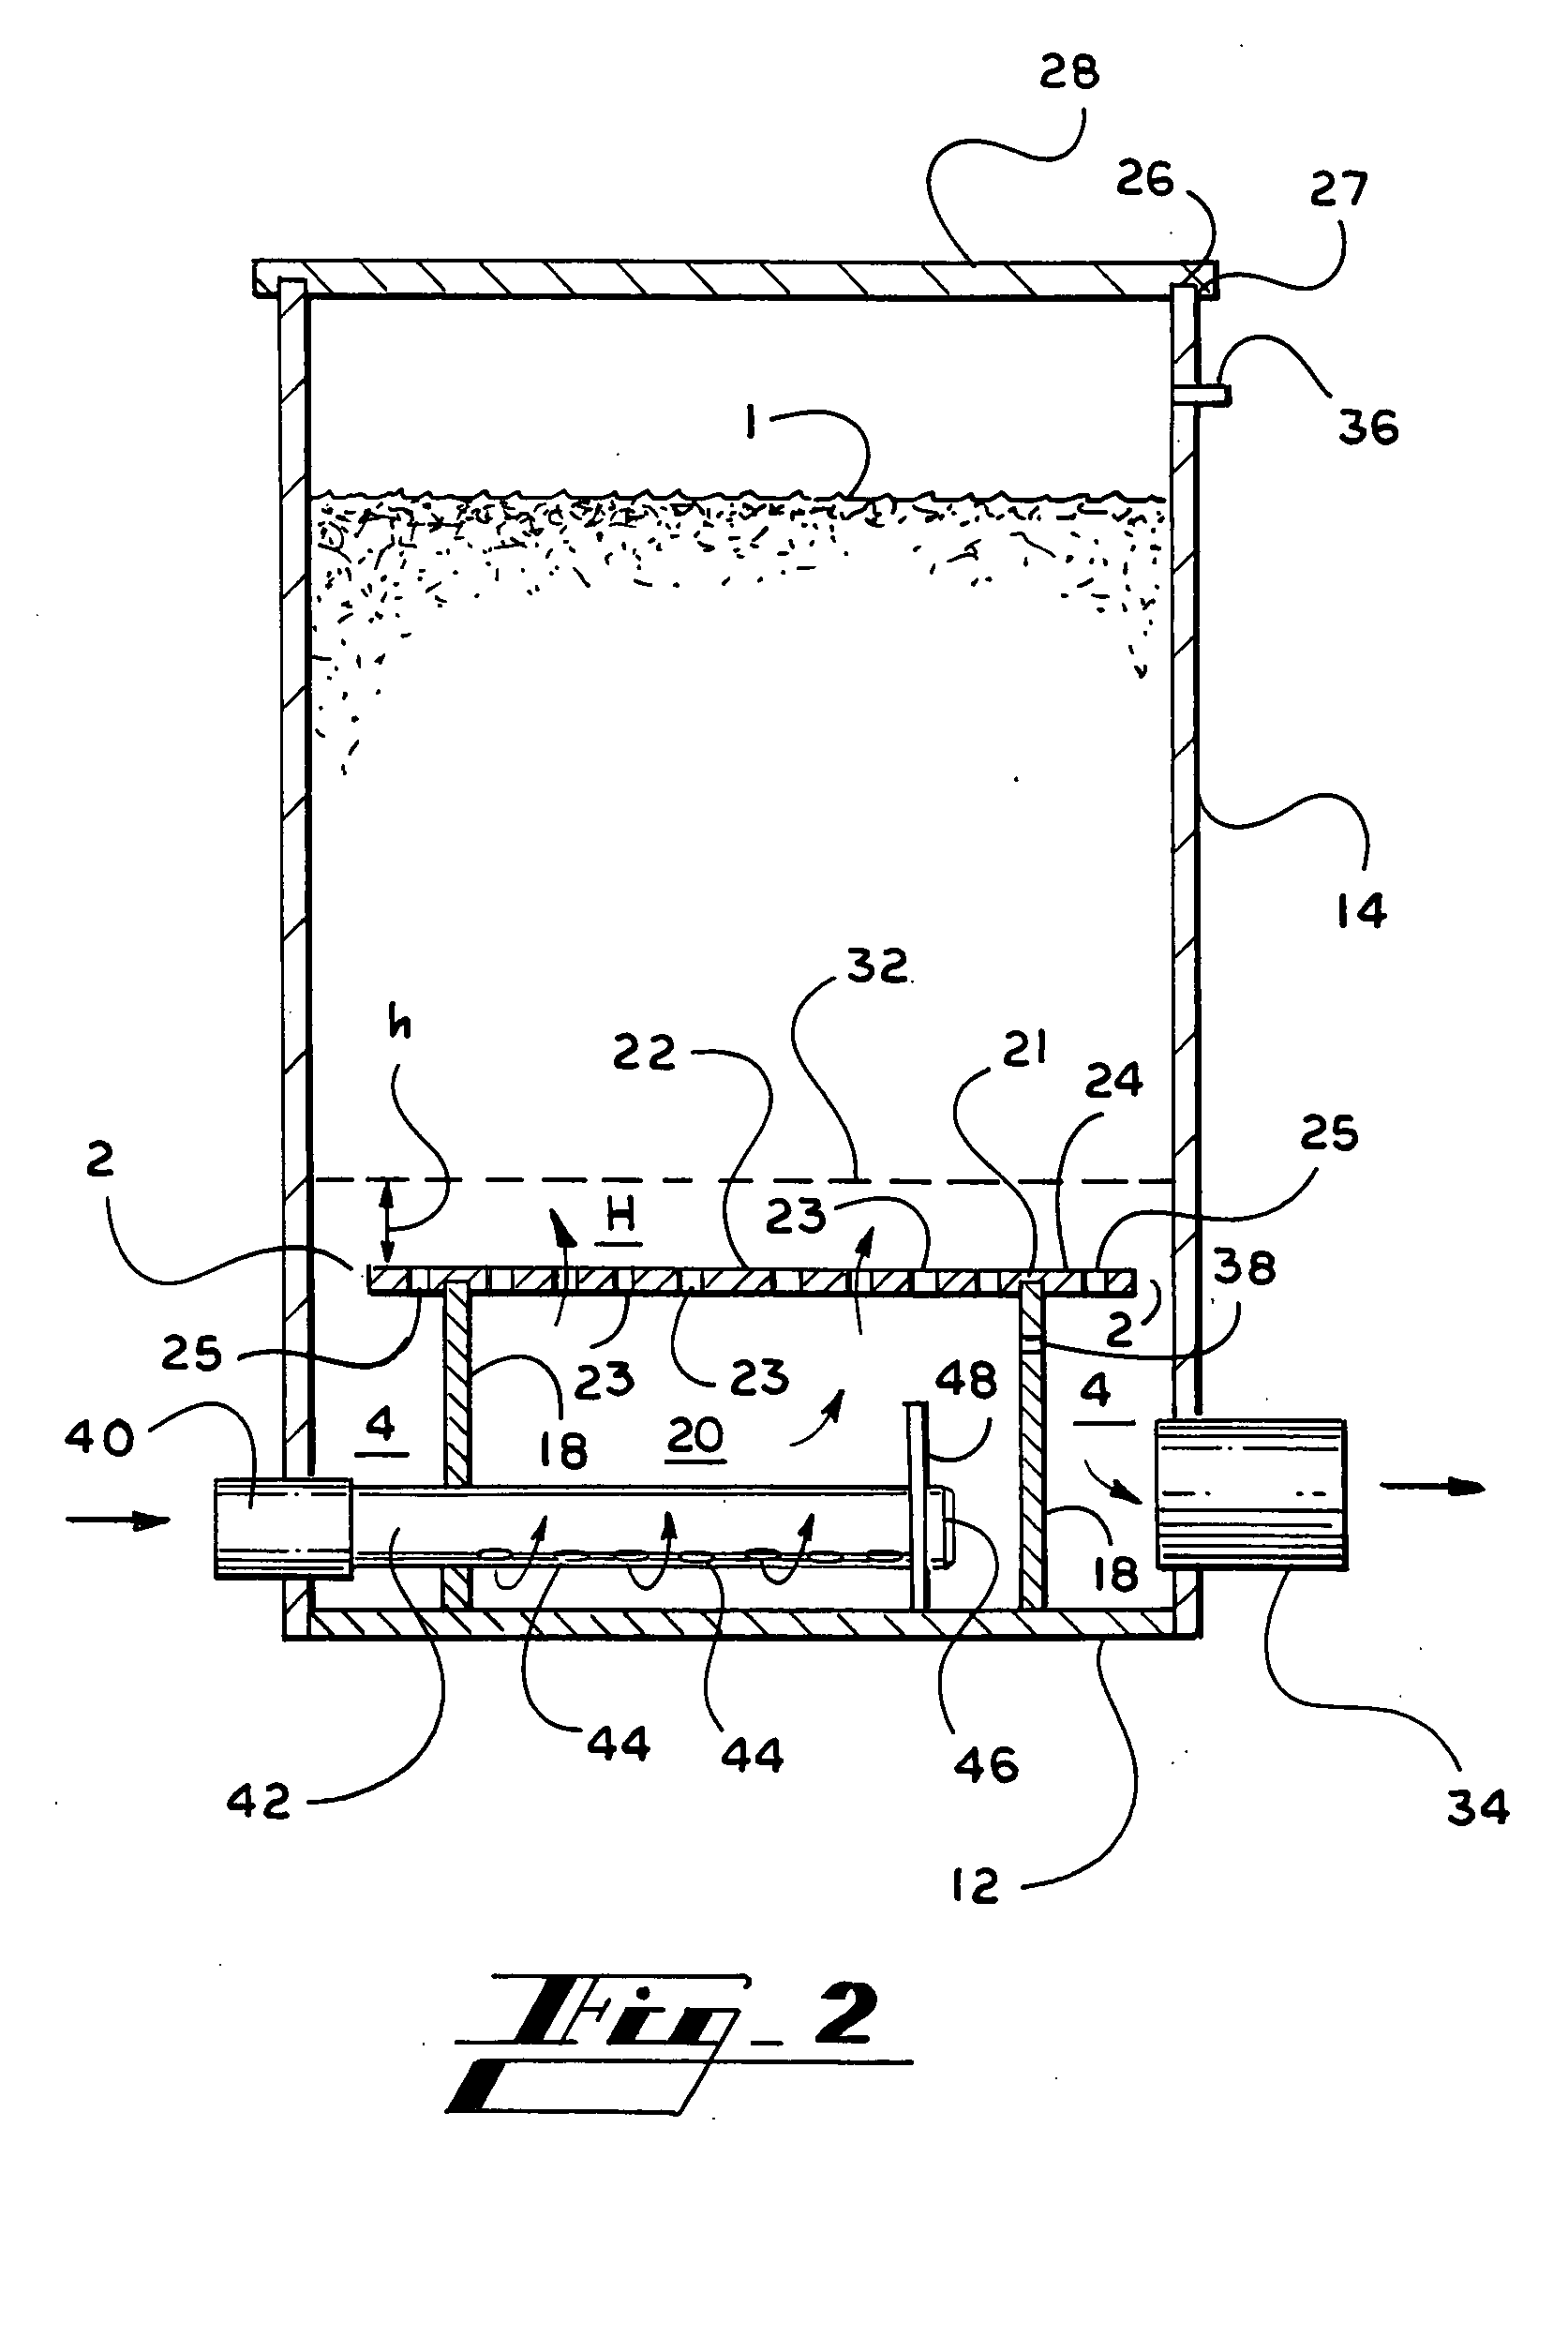 Online poultry reprocessing tablet chlorination system and method